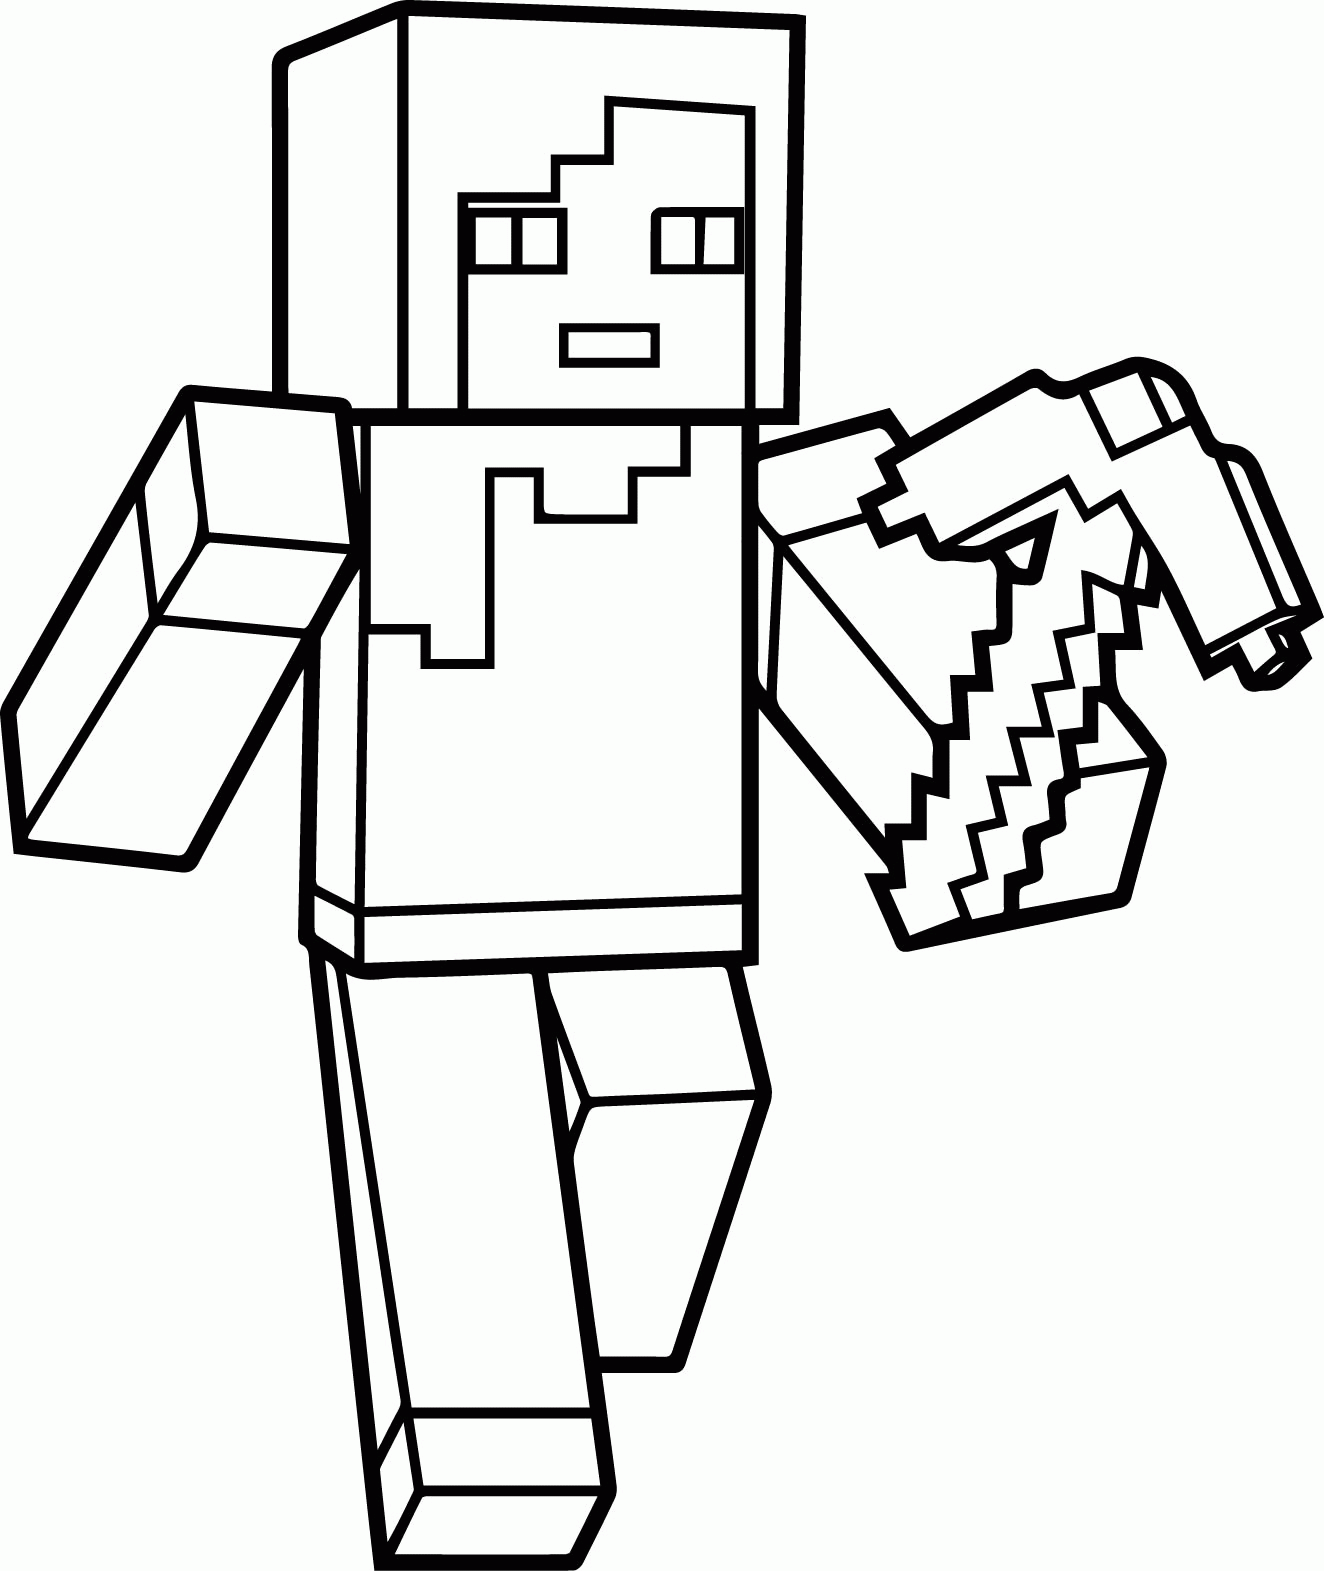 Minecraft Coloring Pages Cat - Coloring Home